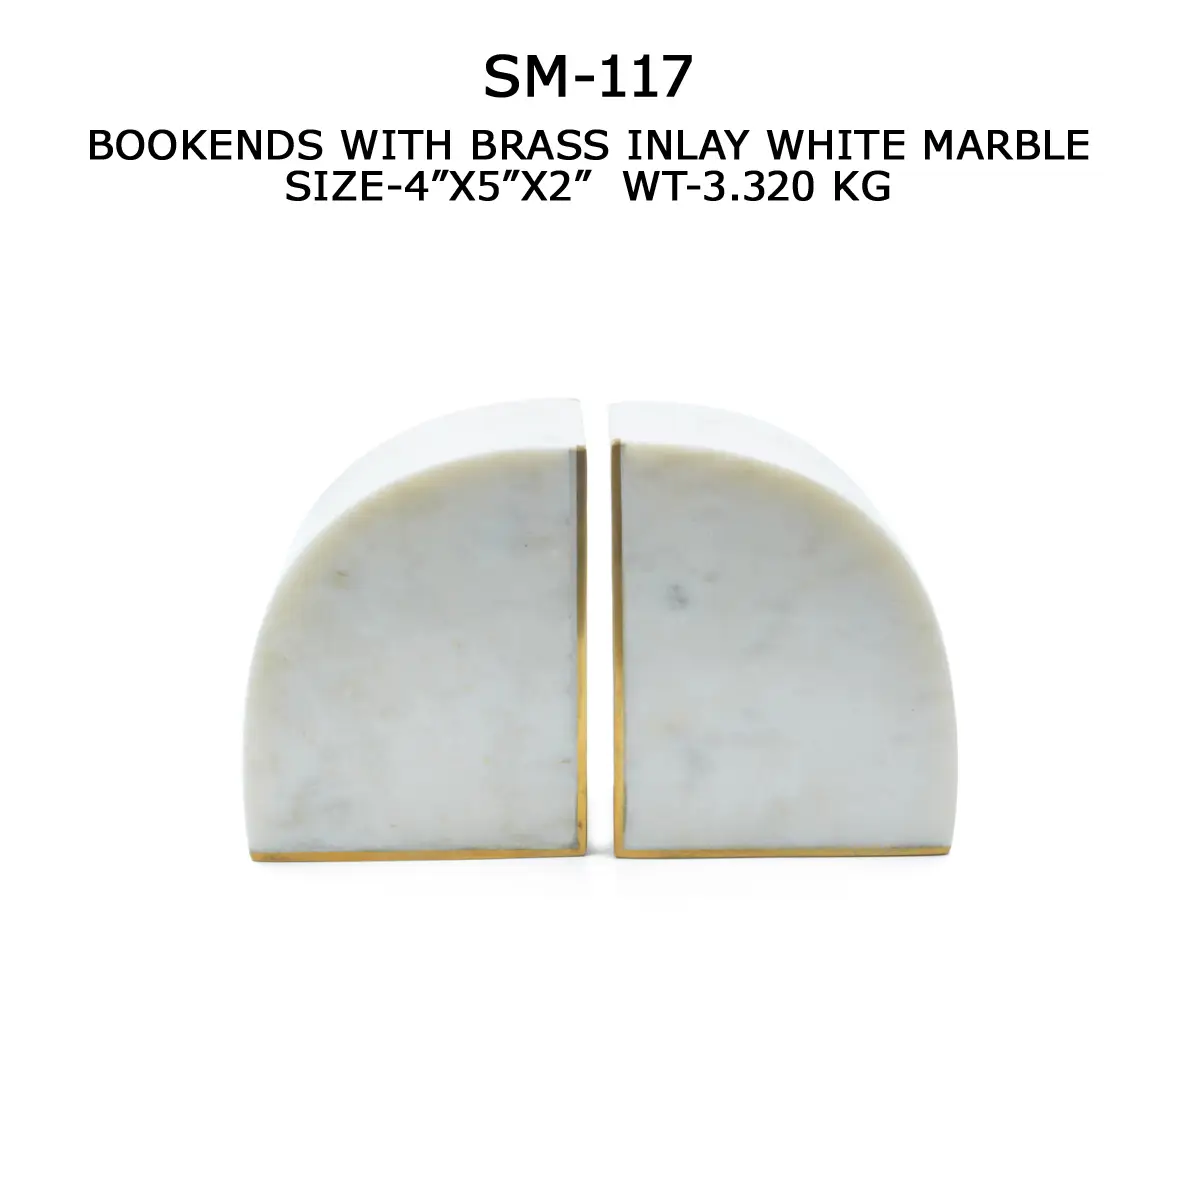 BOOKEND WITH BRASS INLAY WHITE MARBLE